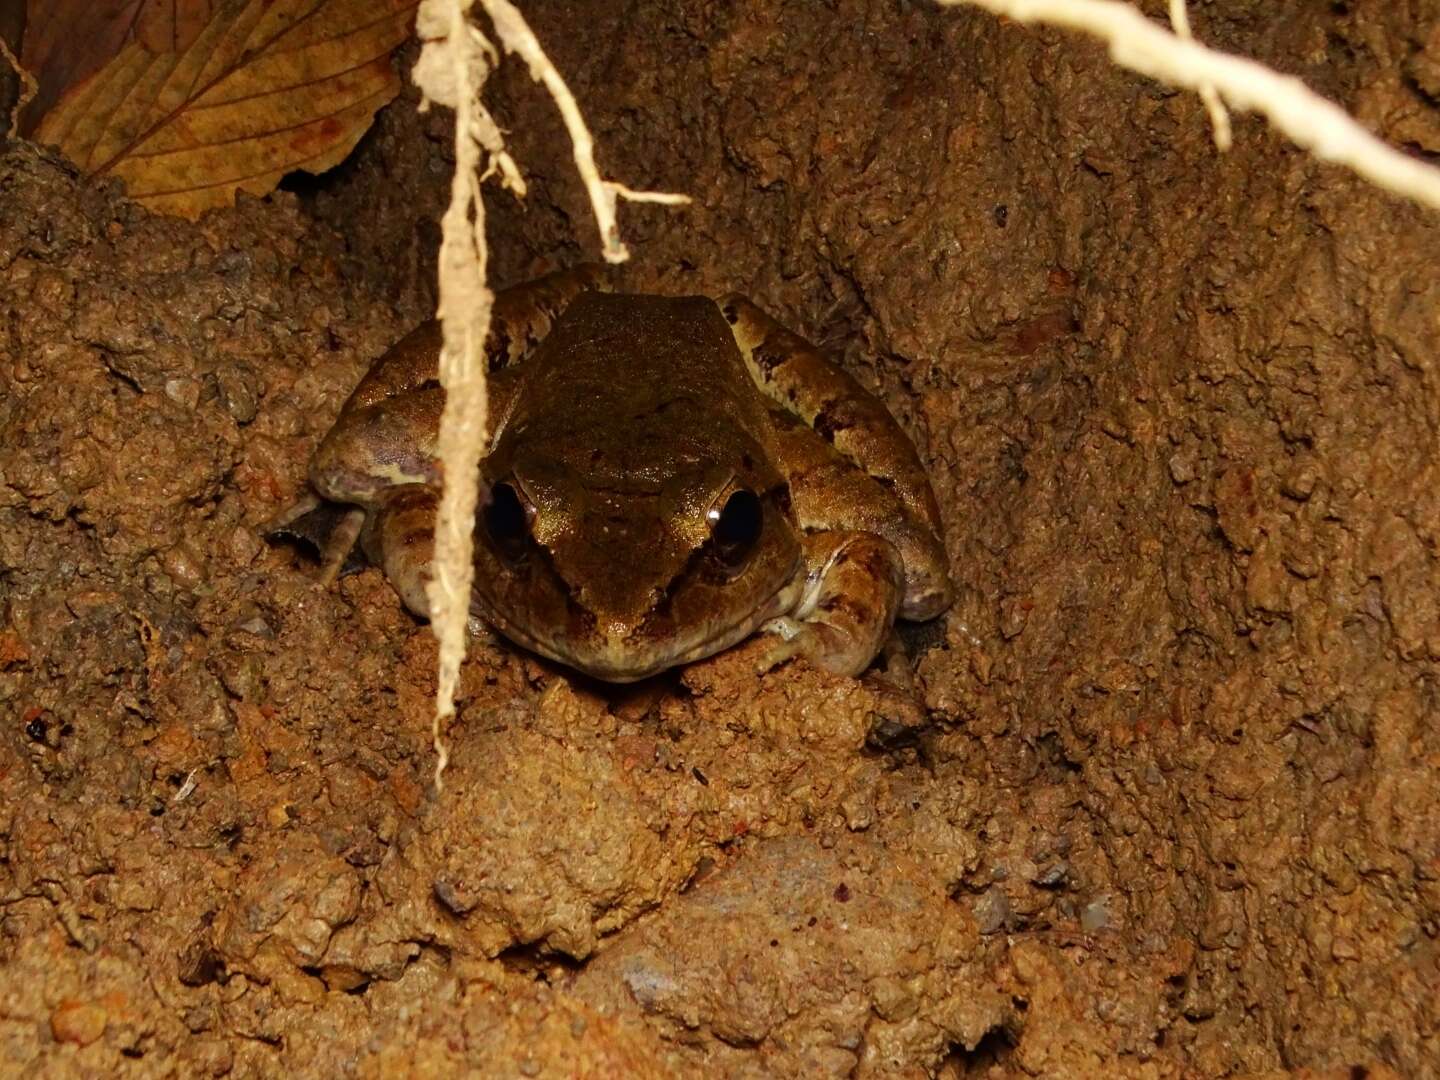 Image of Giant River Frog